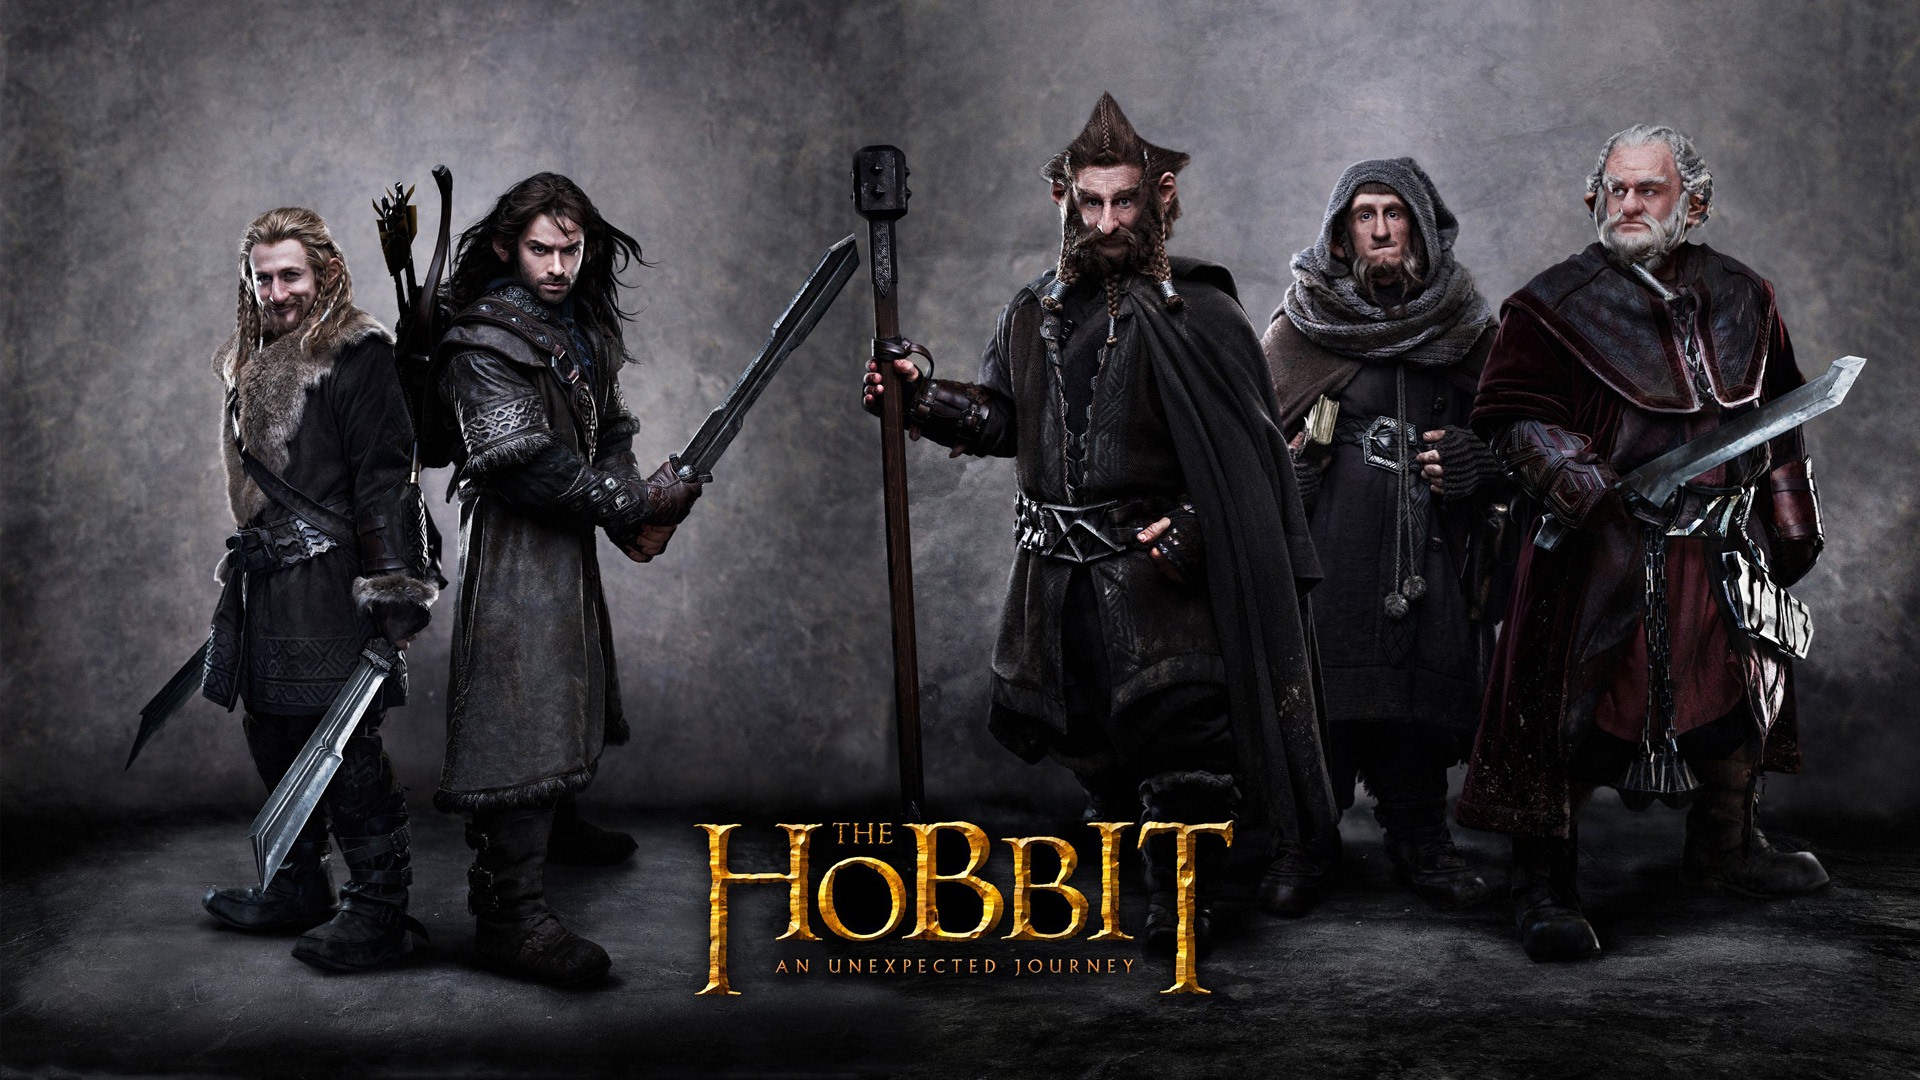 The Hobbit: An Unexpected Journey HD wallpapers #9 - 1920x1080